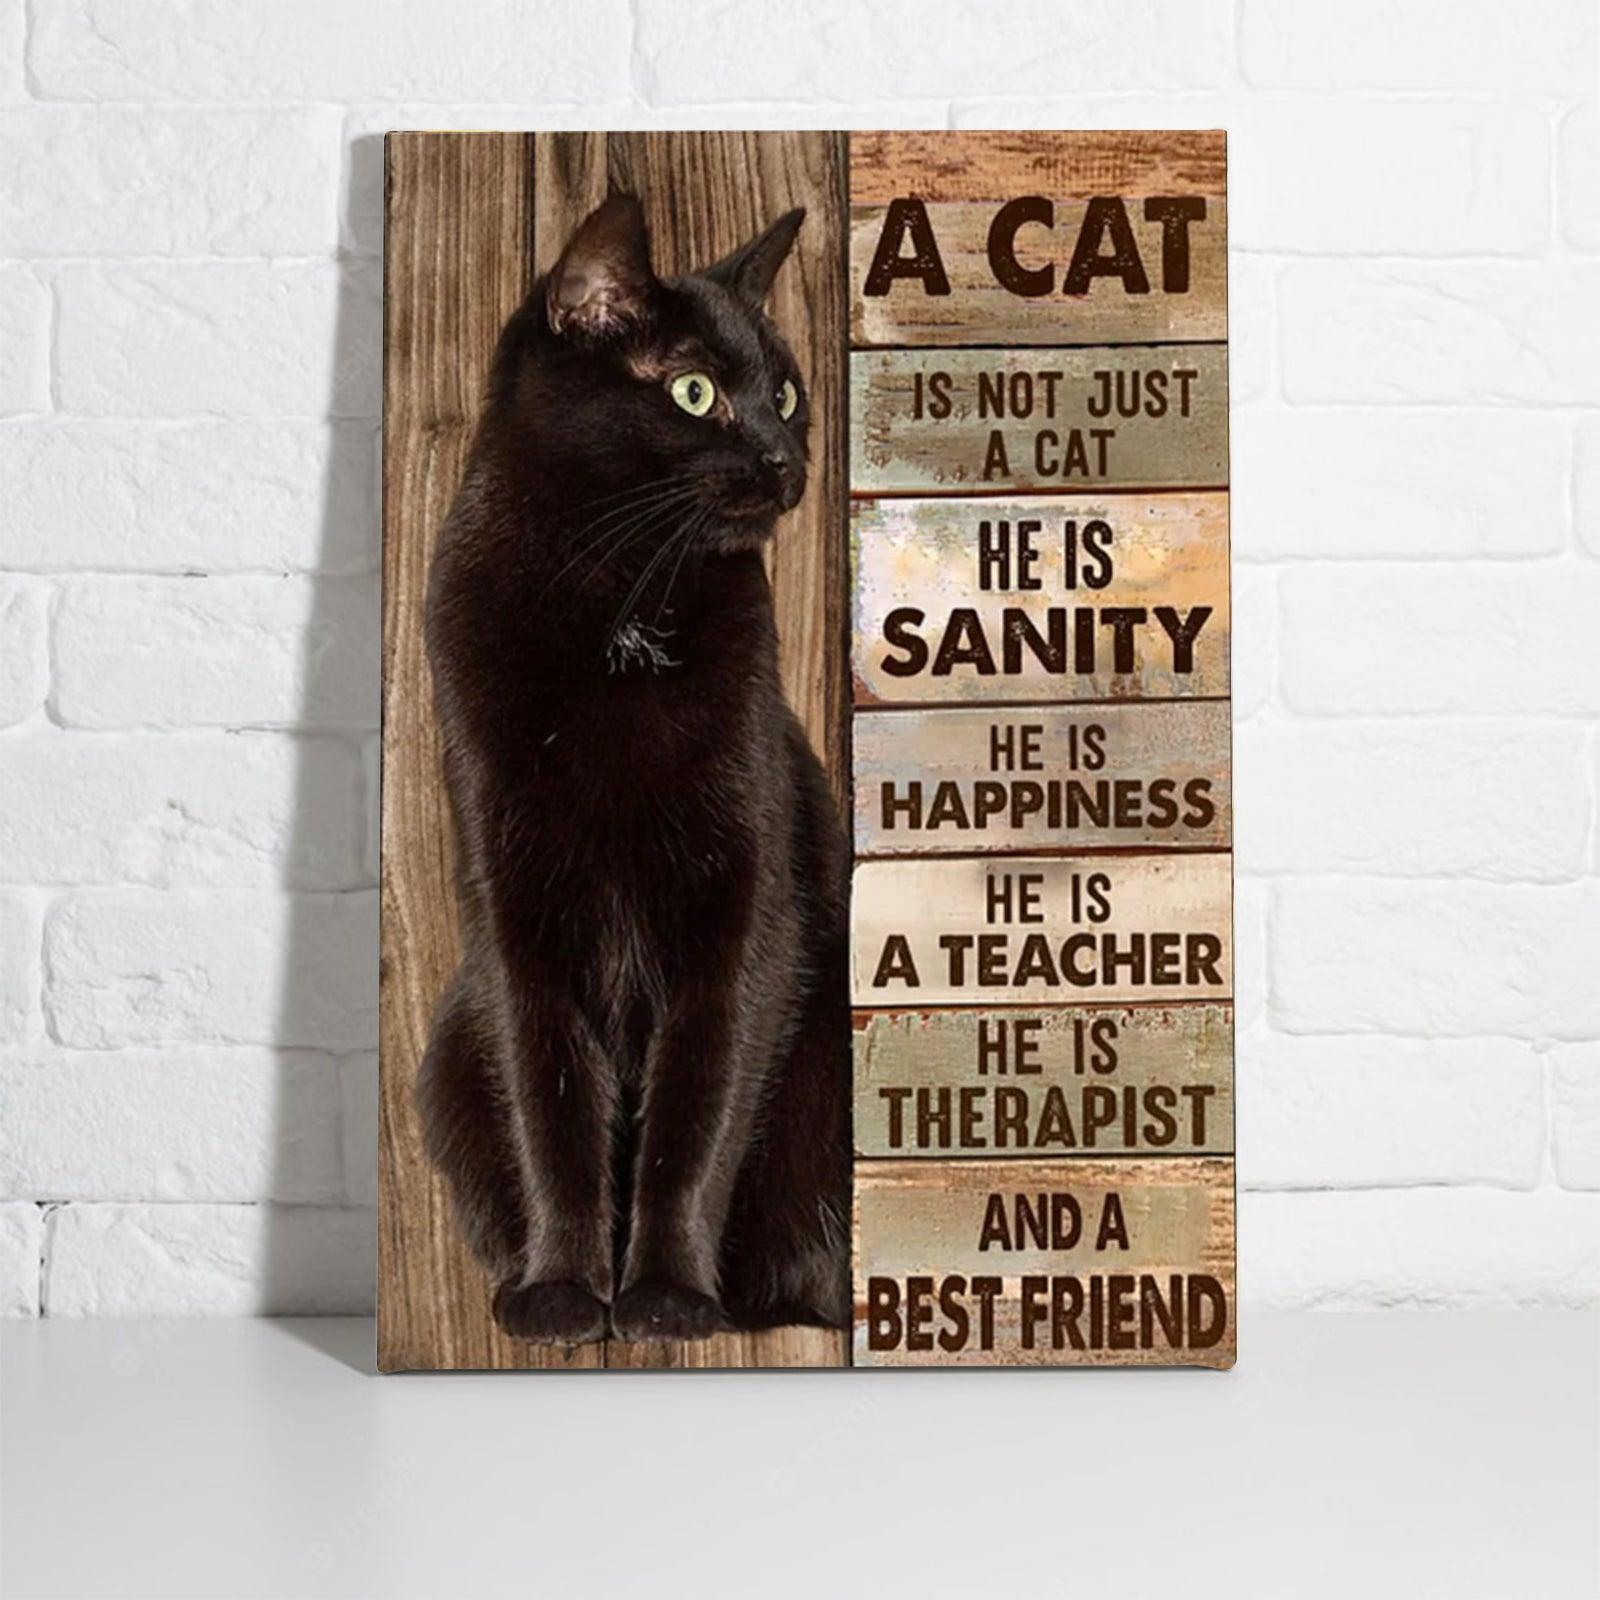 Black Cat Portrait Canvas - A Cat Is Not Just A Cat Premium Wrapped Canvas - Perfect Gift For Black Cat Lovers, Black Cat Owners, Cat Lovers - Amzanimalsgift